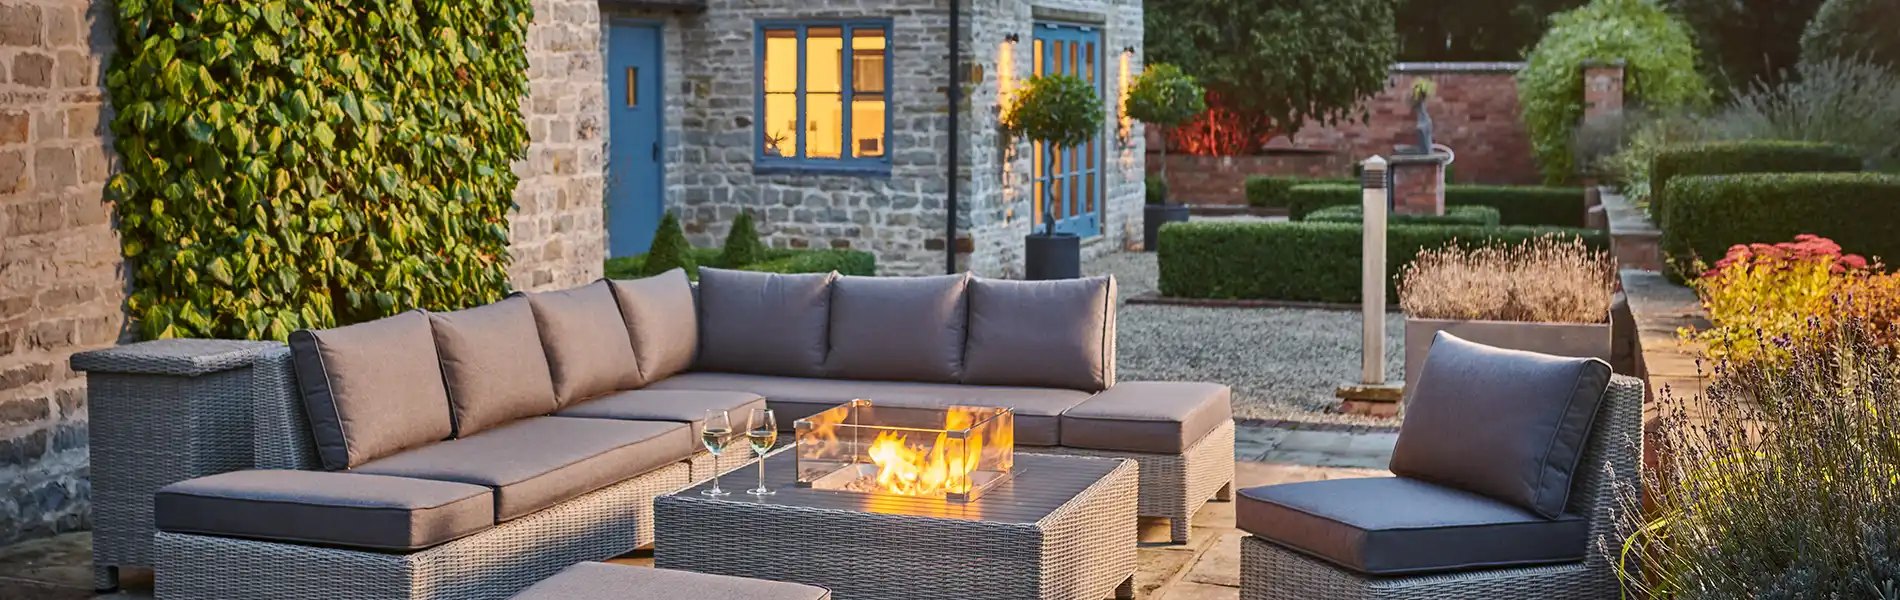 Kettler Palma garden furniture and fire pit on patio